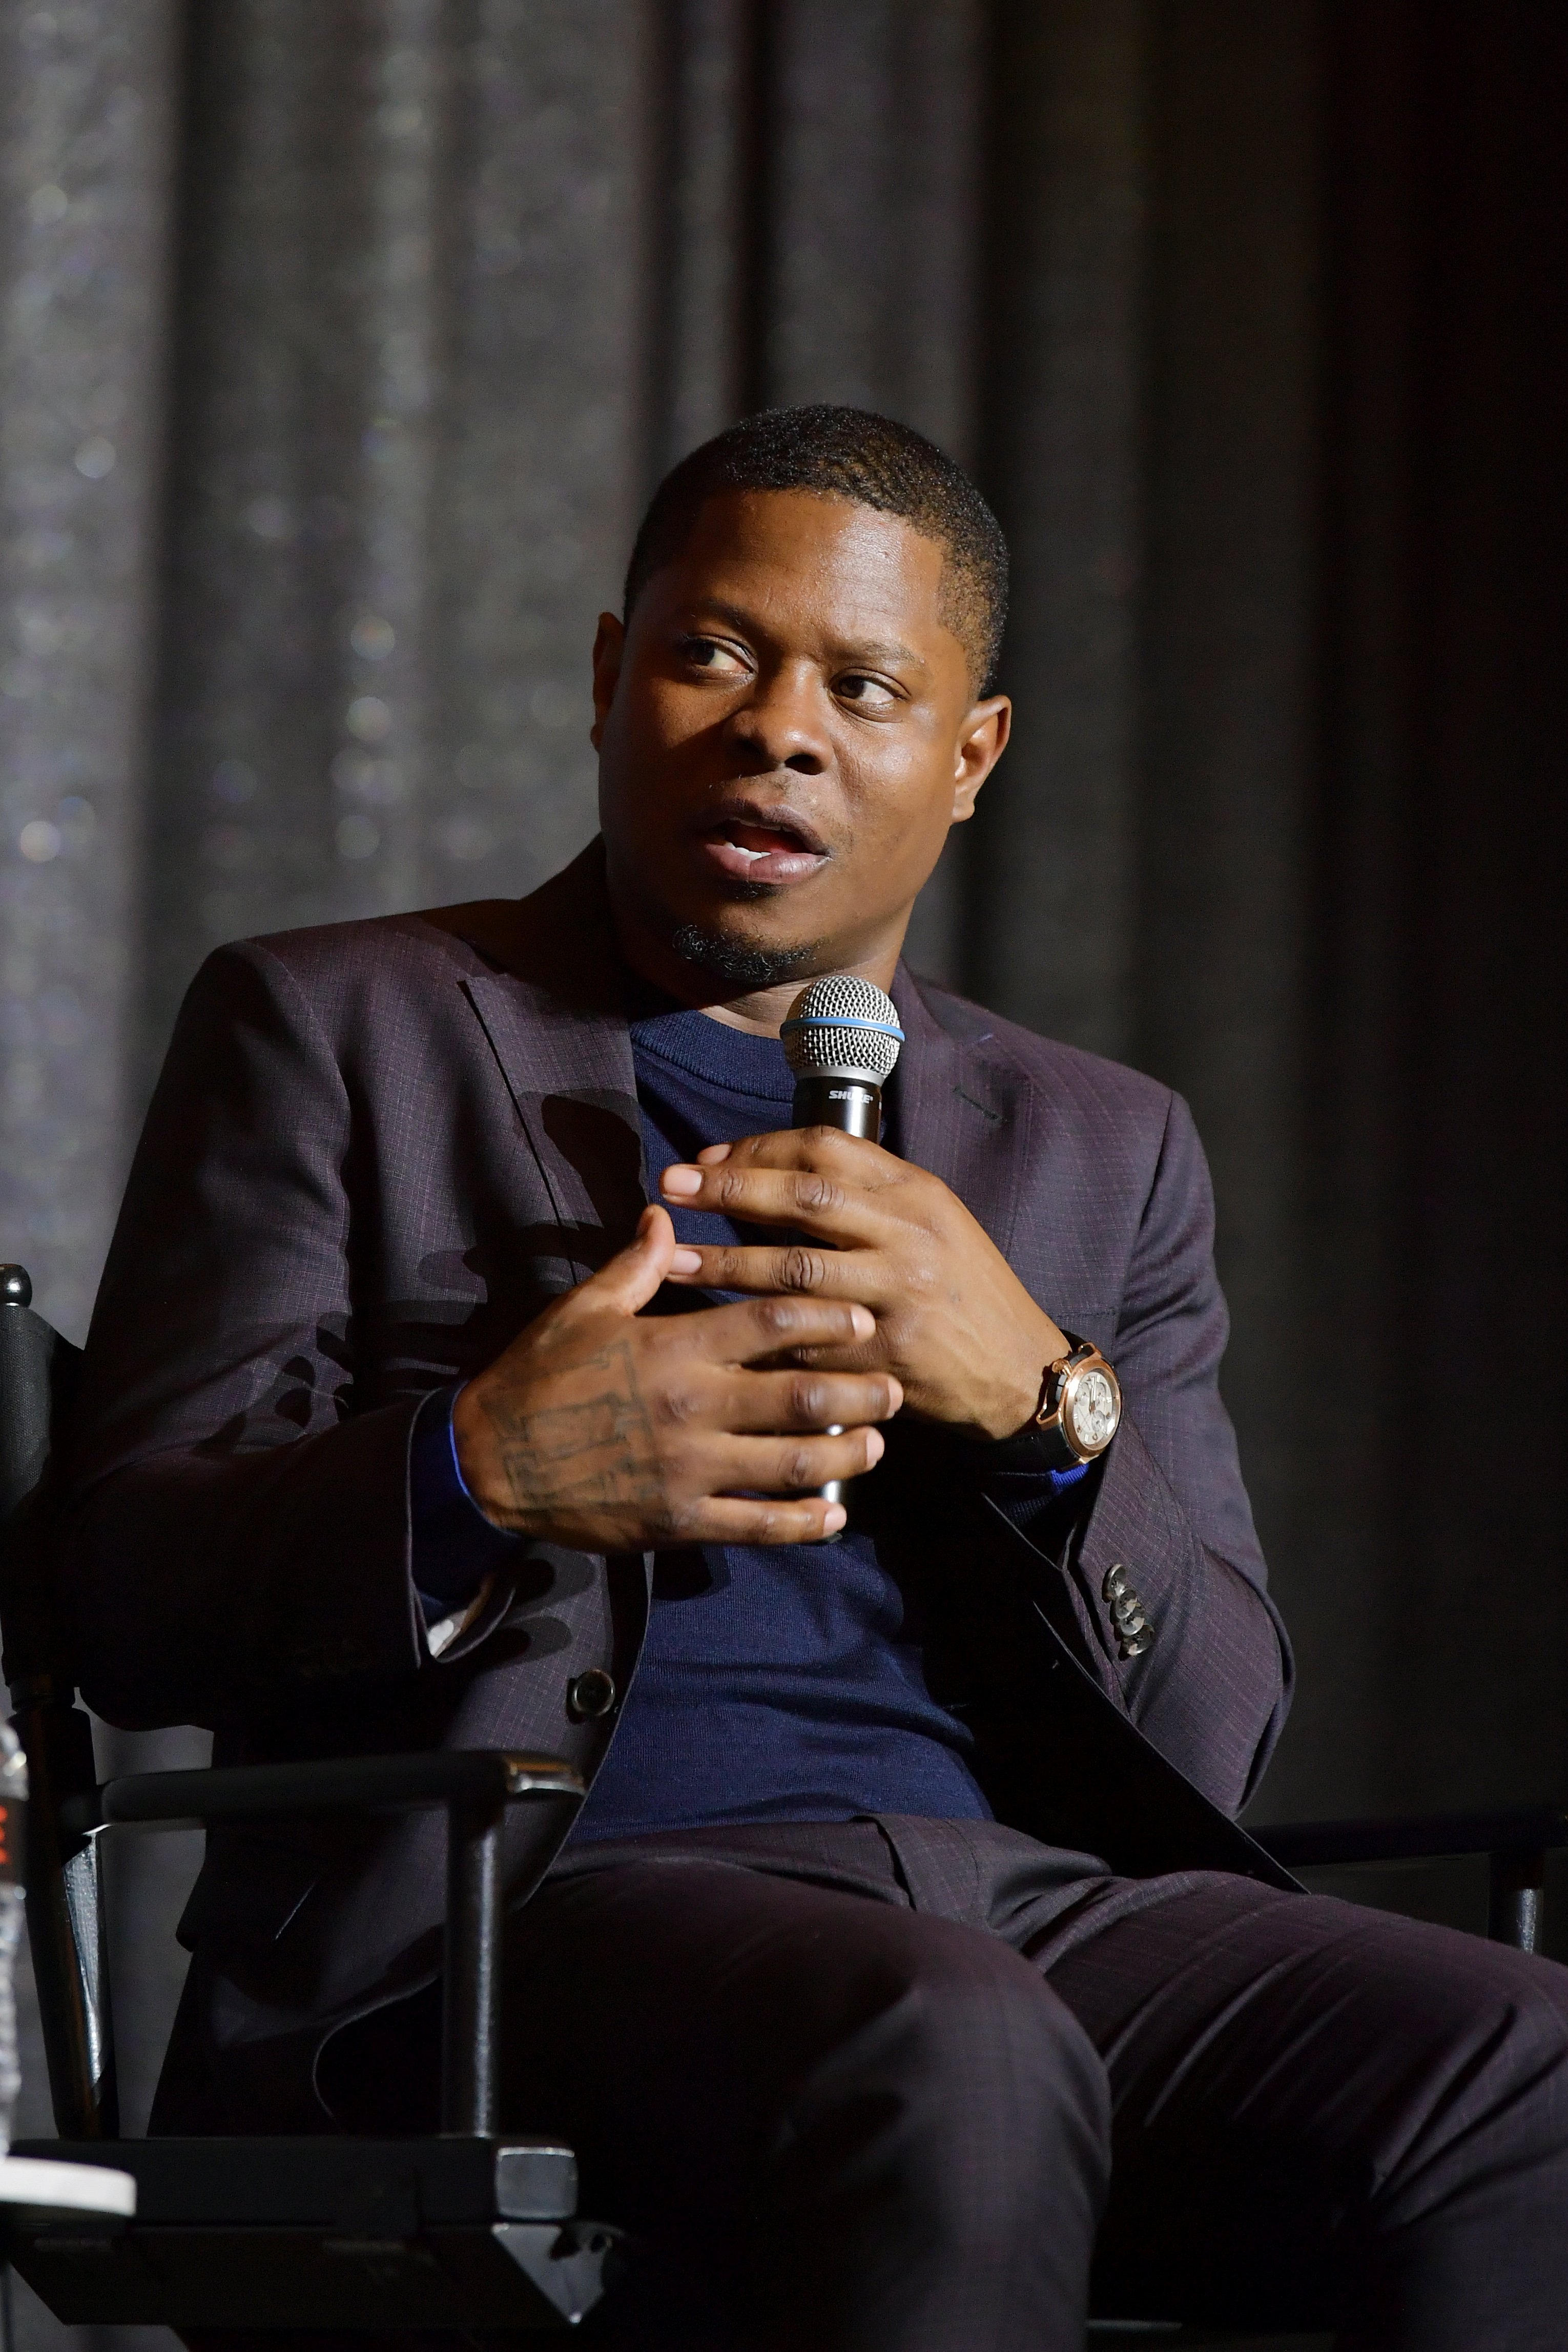 Jason Mitchell attends Showtime's "The Chi" For Your Consideration event on April 10, 2019. | Photo: Getty Images